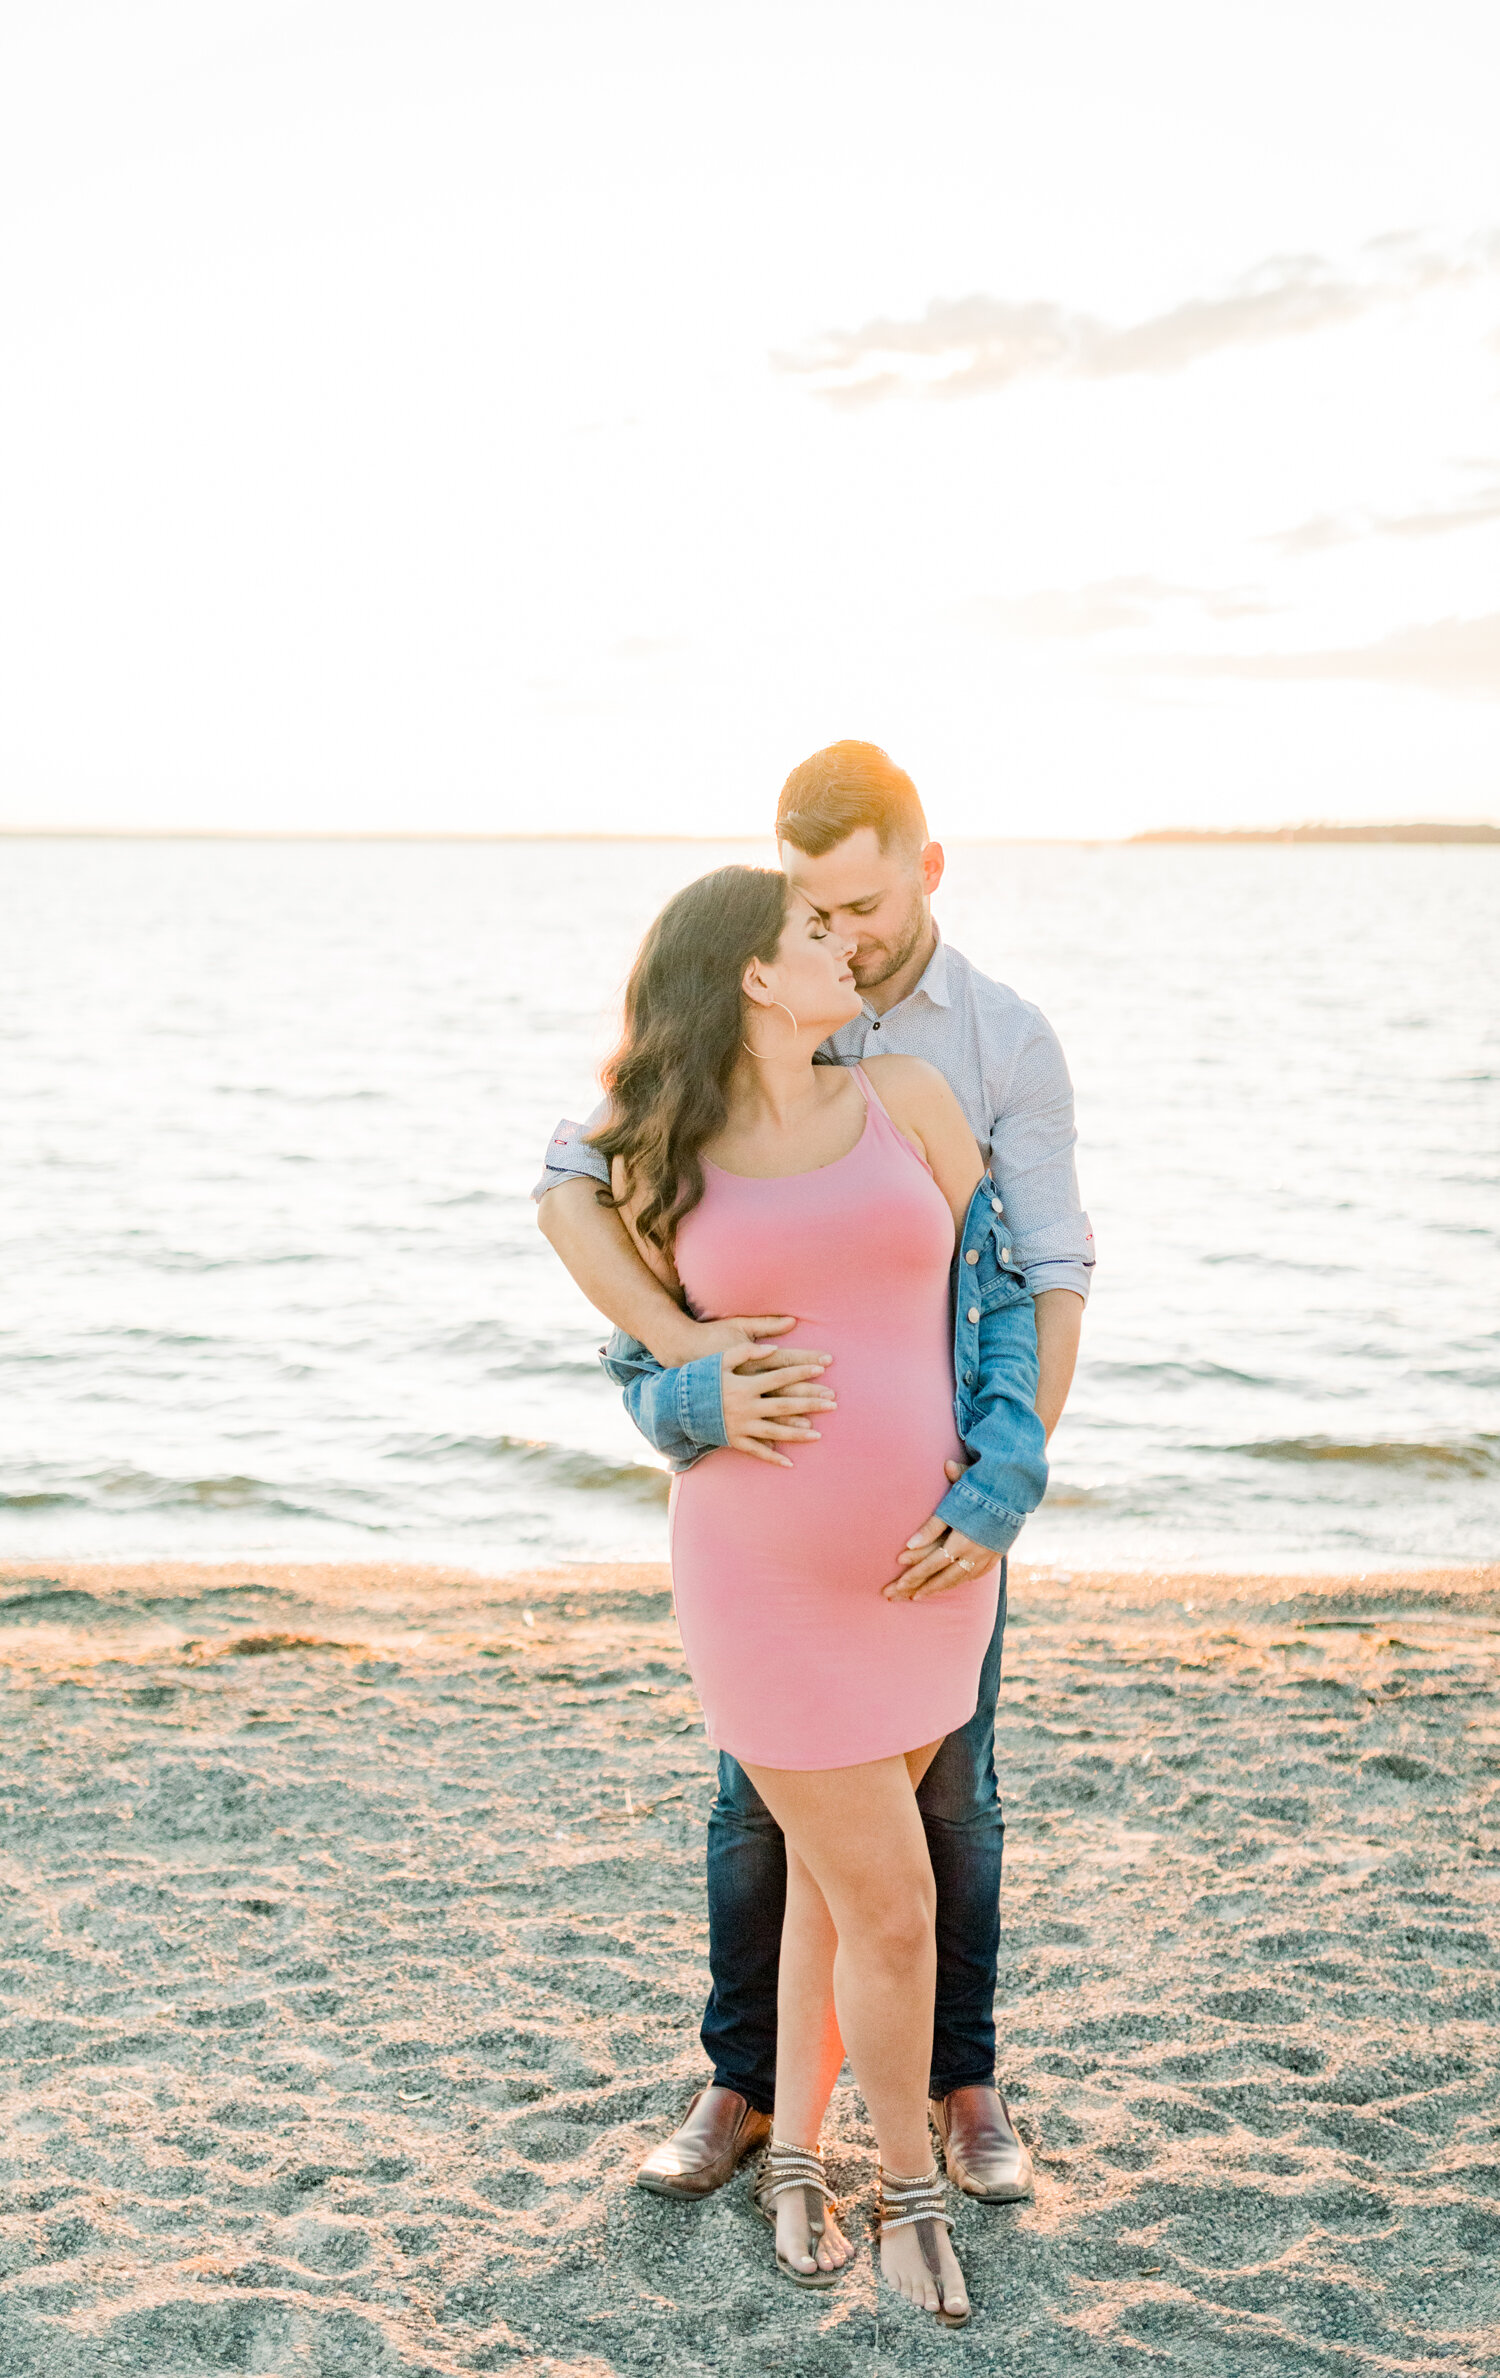  With the sun setting behind them, Ontario, Canada maternity photographer, Chelsea Mason Photography captures this expectant couple romantically embracing. womens fitted pink spaghetti strapped maternity dress, oversized denim jacket hanging off the 